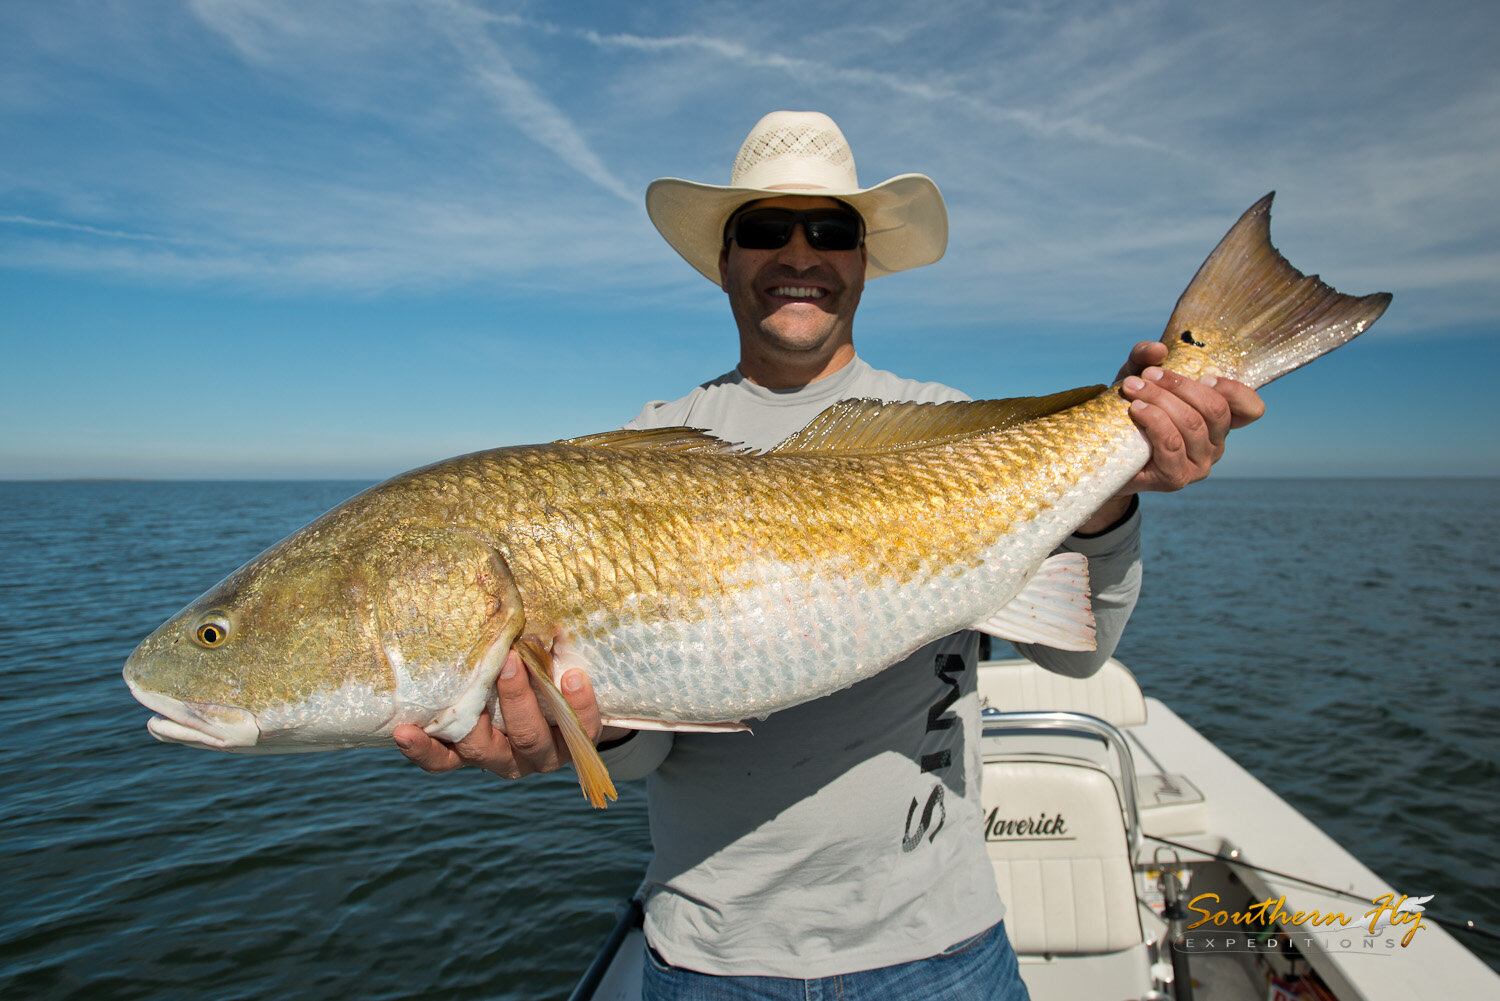 2019-11-25_SouthernFlyExpeditions_NewOrleans_TomHamiltonGroup-Rafe-4.jpg